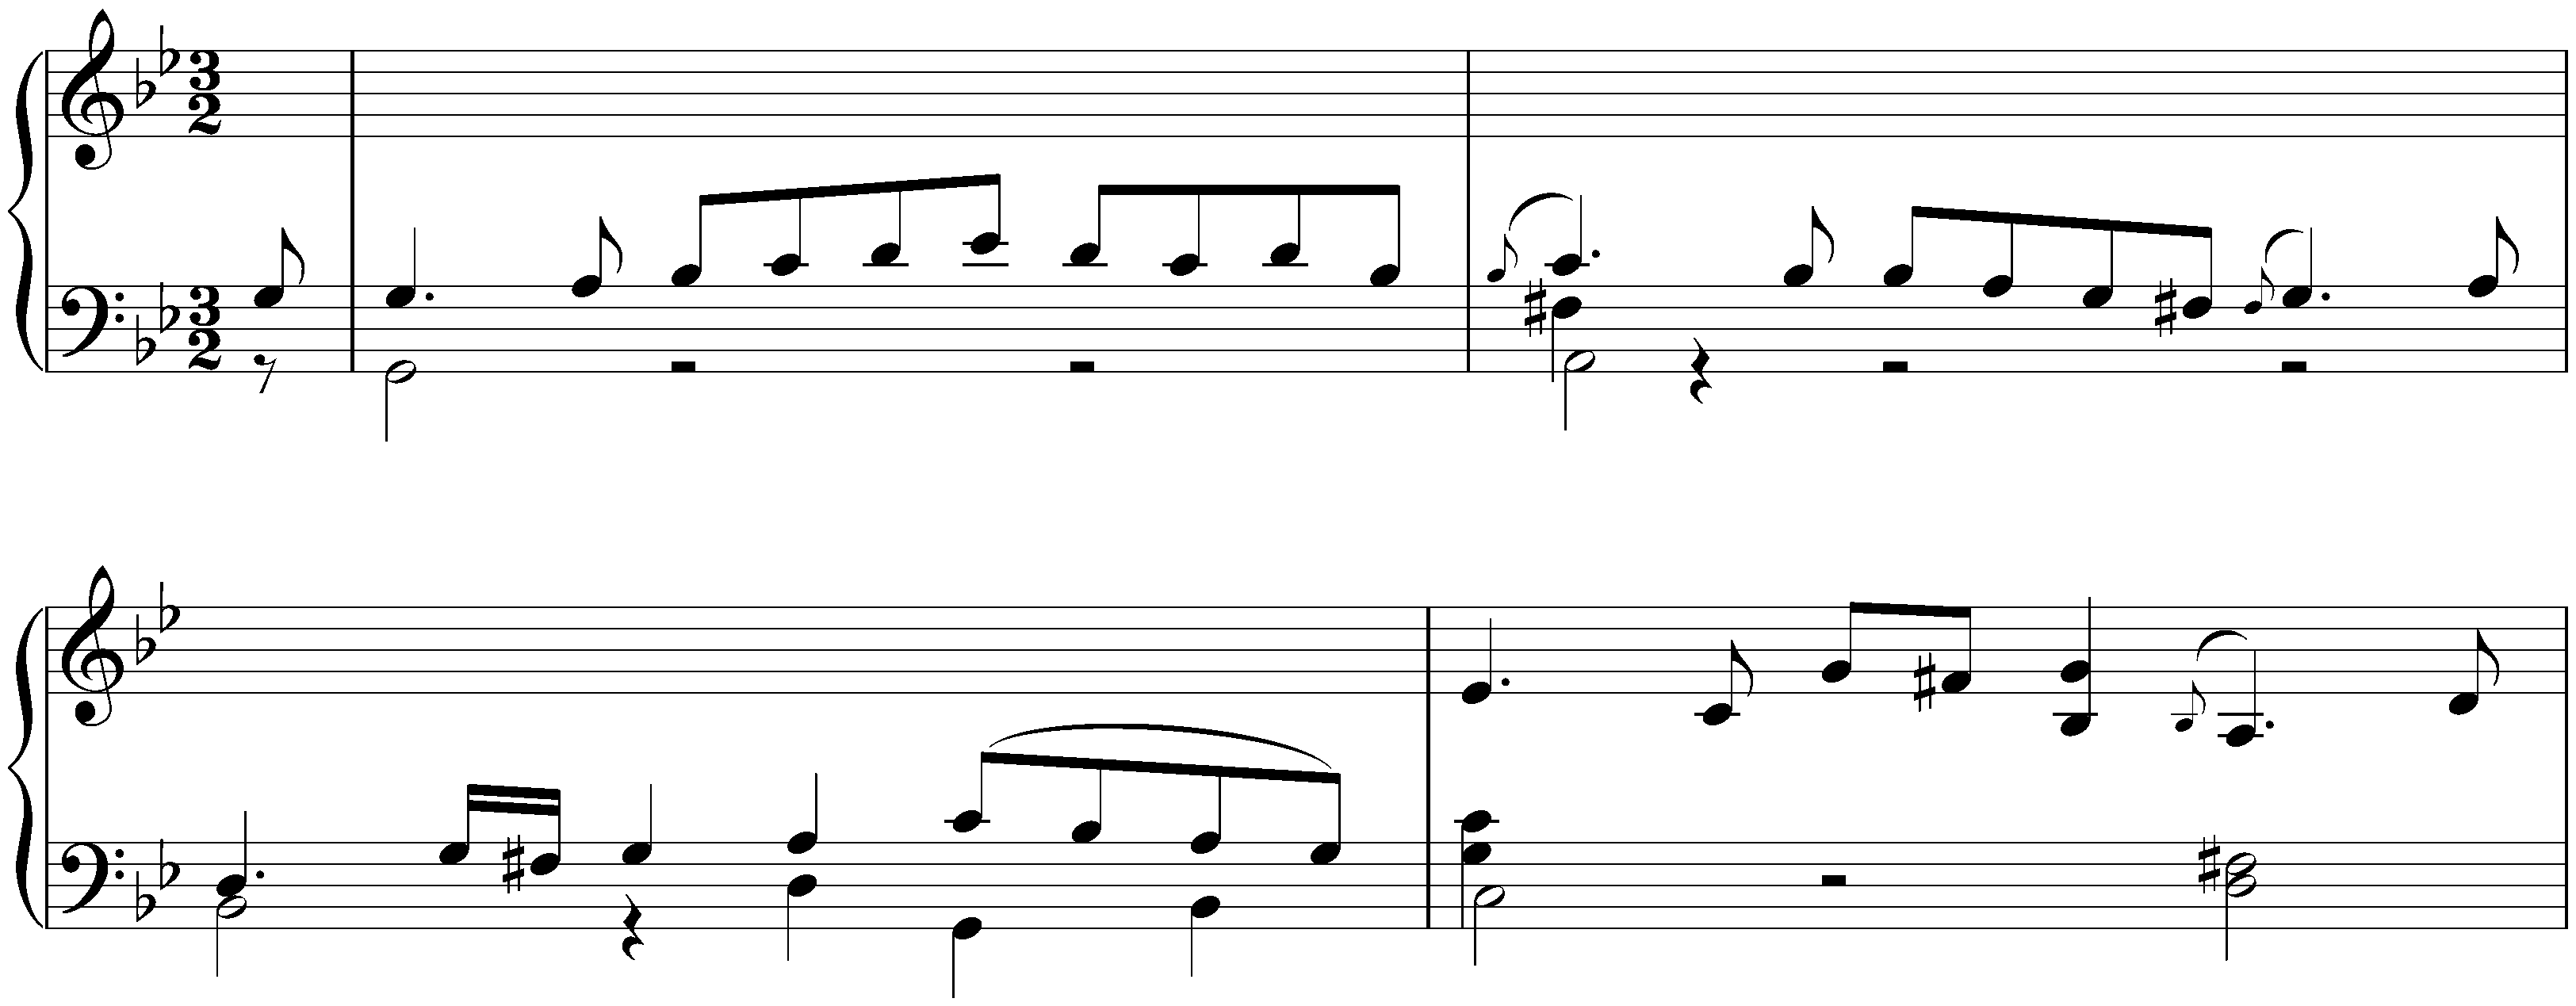 Suite in G minor, BWV 995; 3. Courante